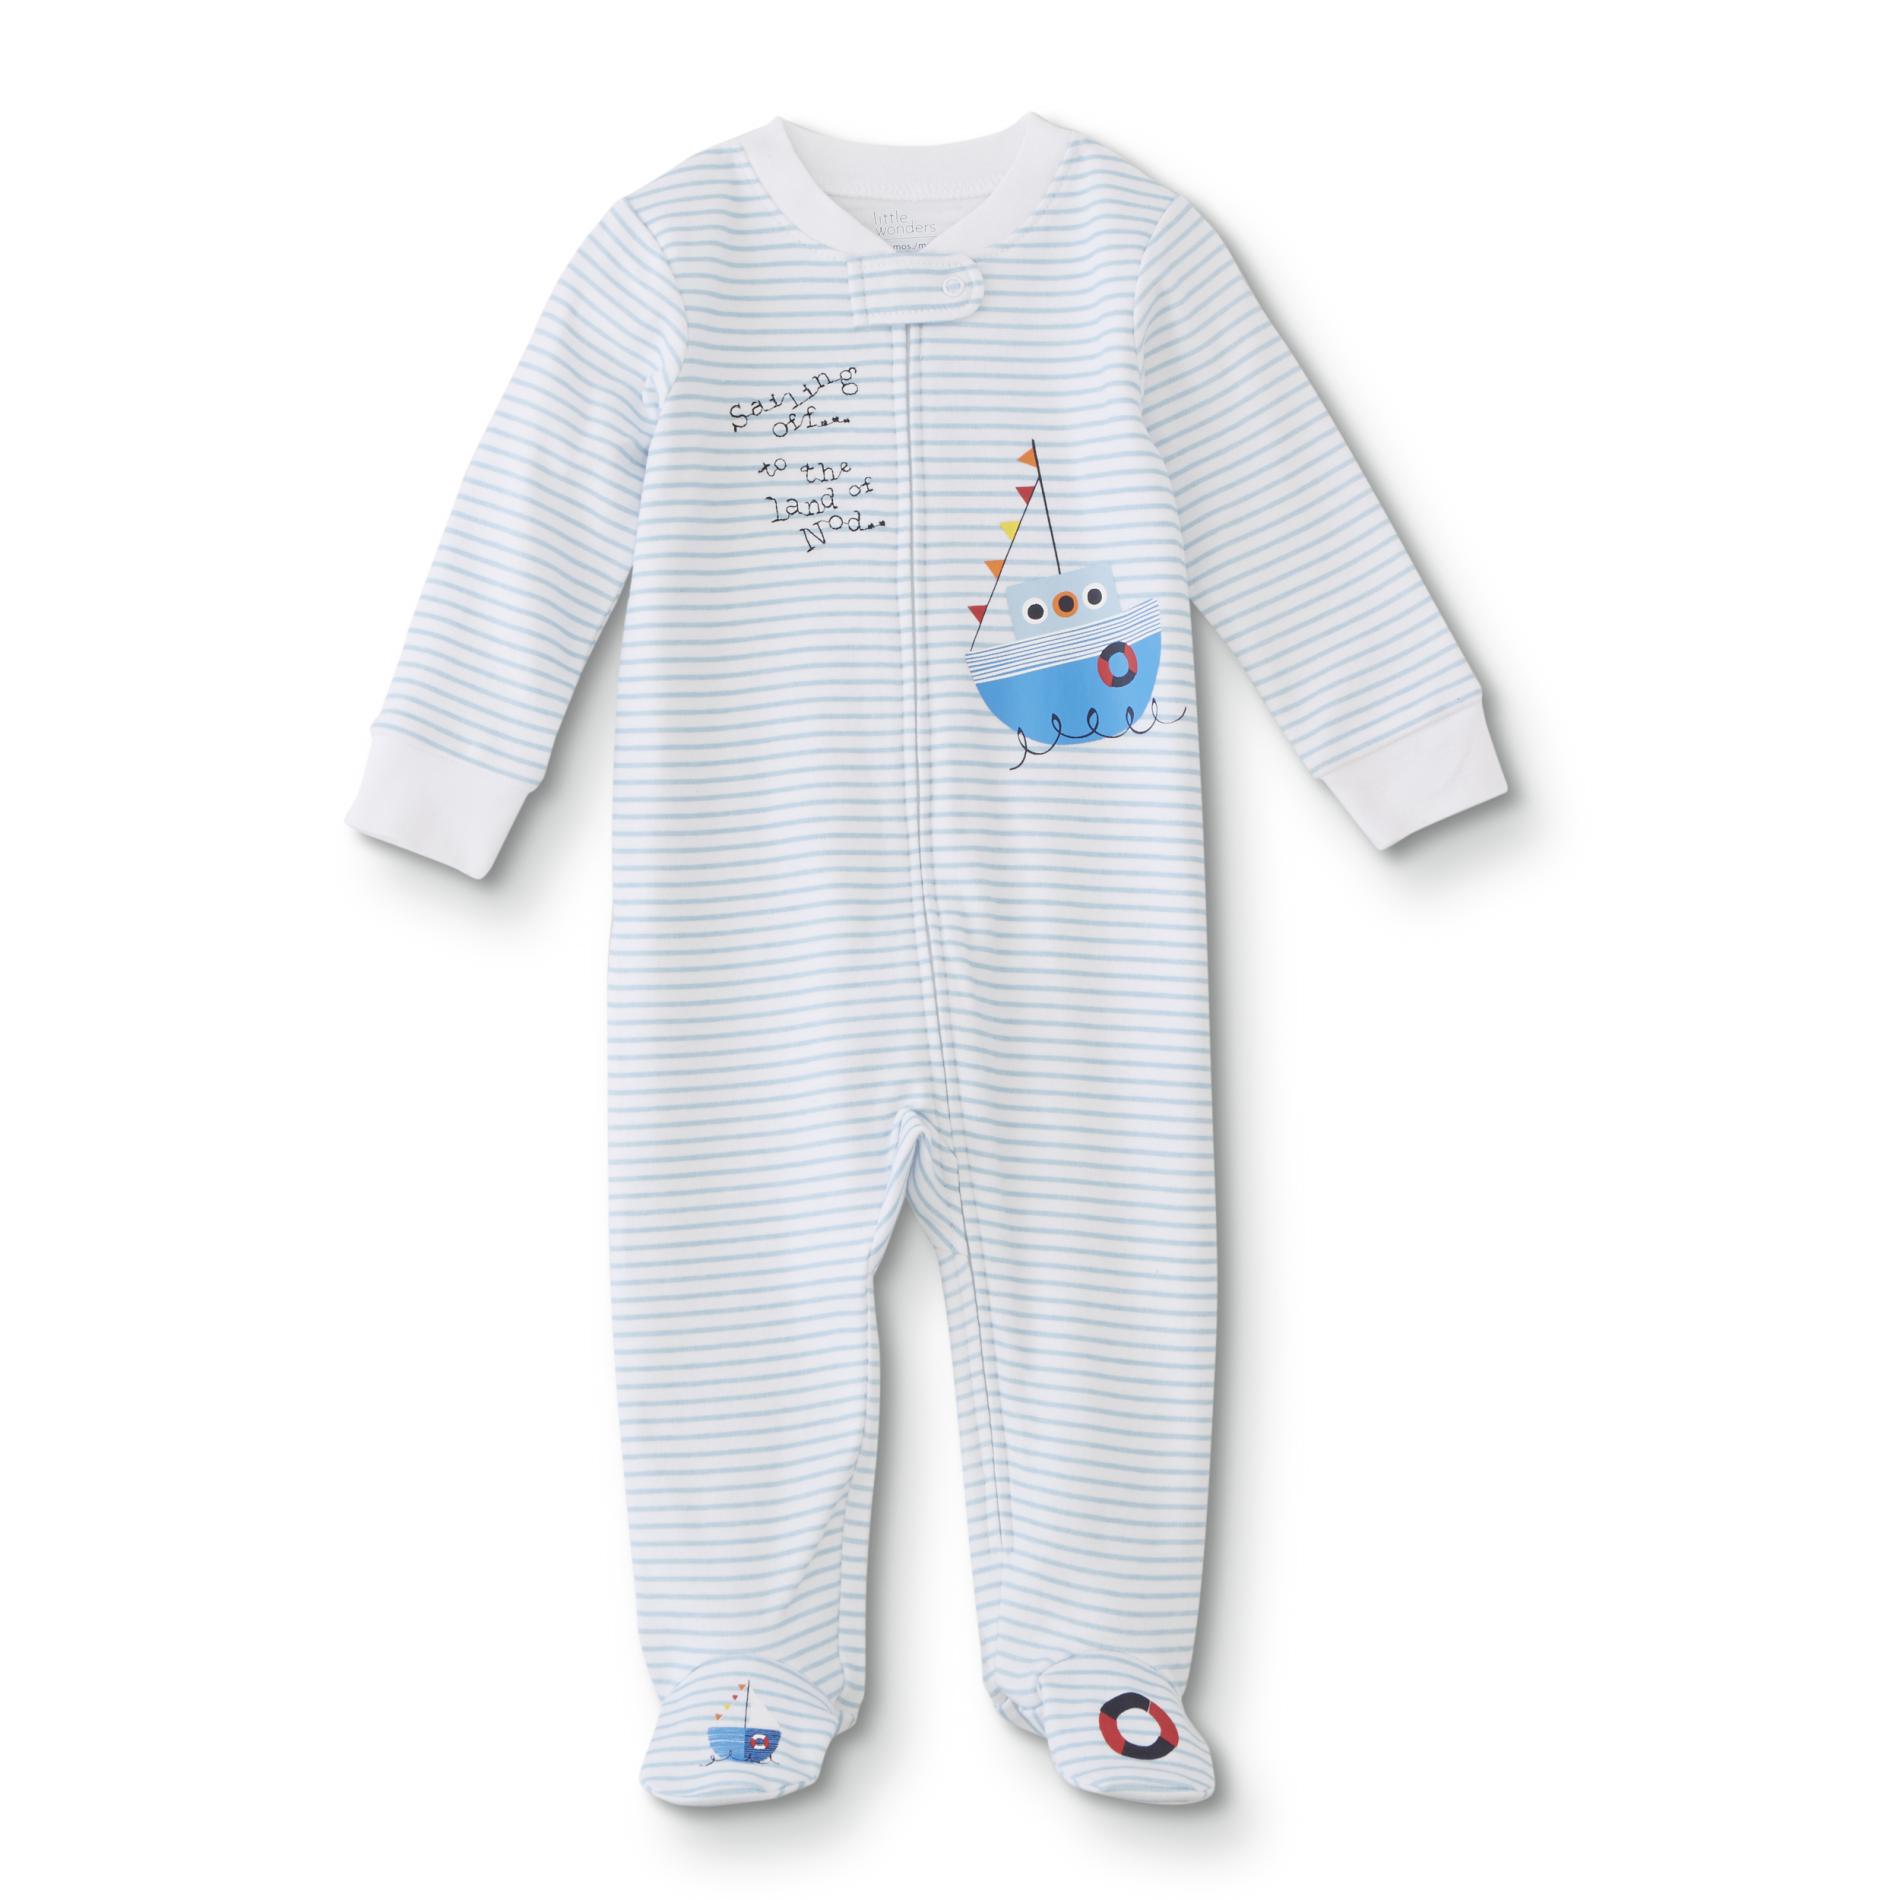 Little Wonders Infant Boys' Footed Pajamas - Striped/Sail